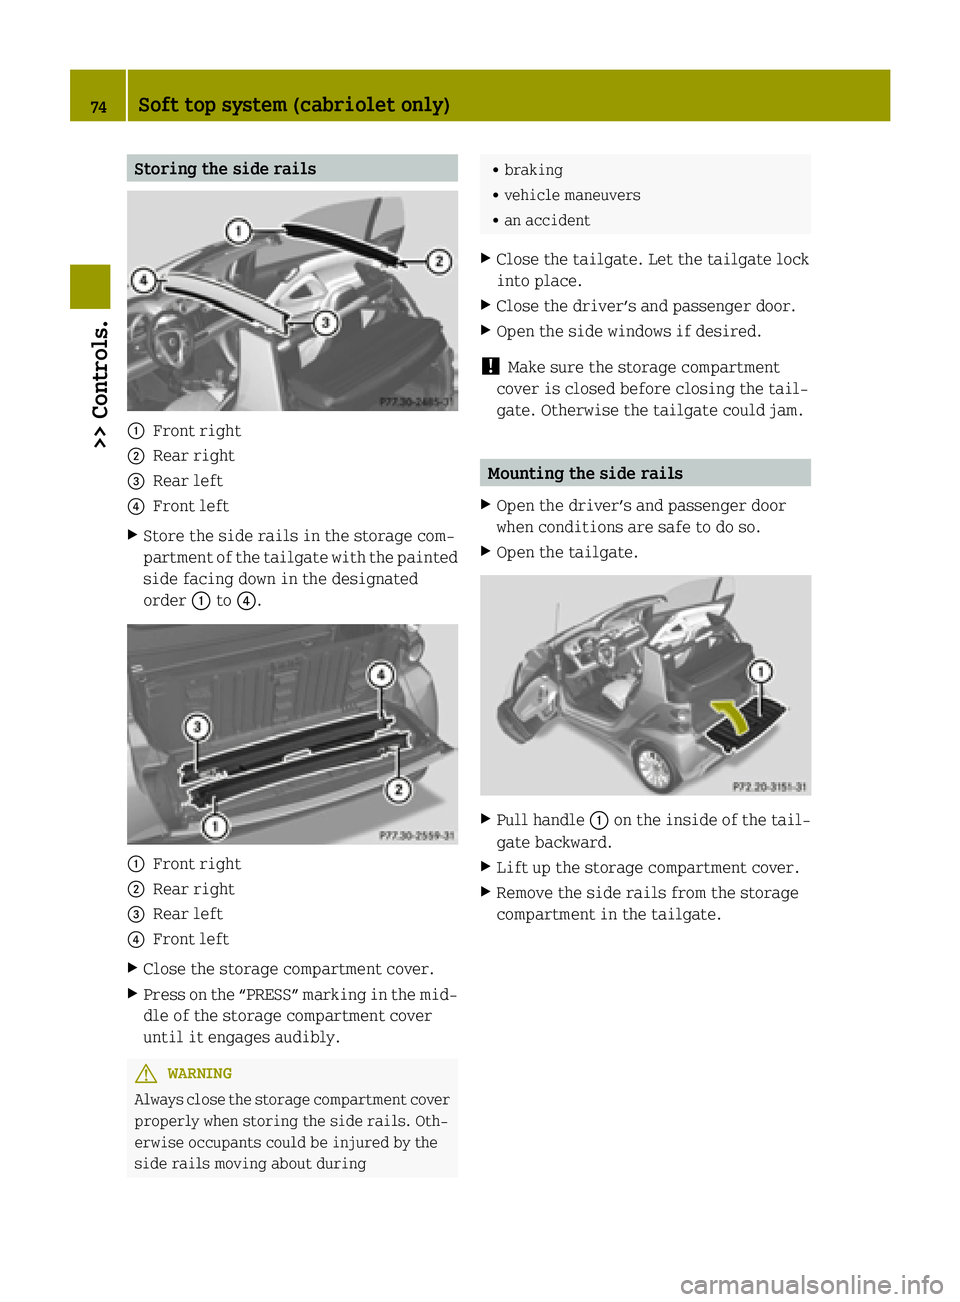 SMART FORTWO COUPE ELECTRIC DRIVE 2015 User Guide Storing the side rails
:
Front right
; Rear right
= Rear left
? Front left
X Store the side rails in the storage com-
partment of the tailgate with the painted
side facing down in the designated
order